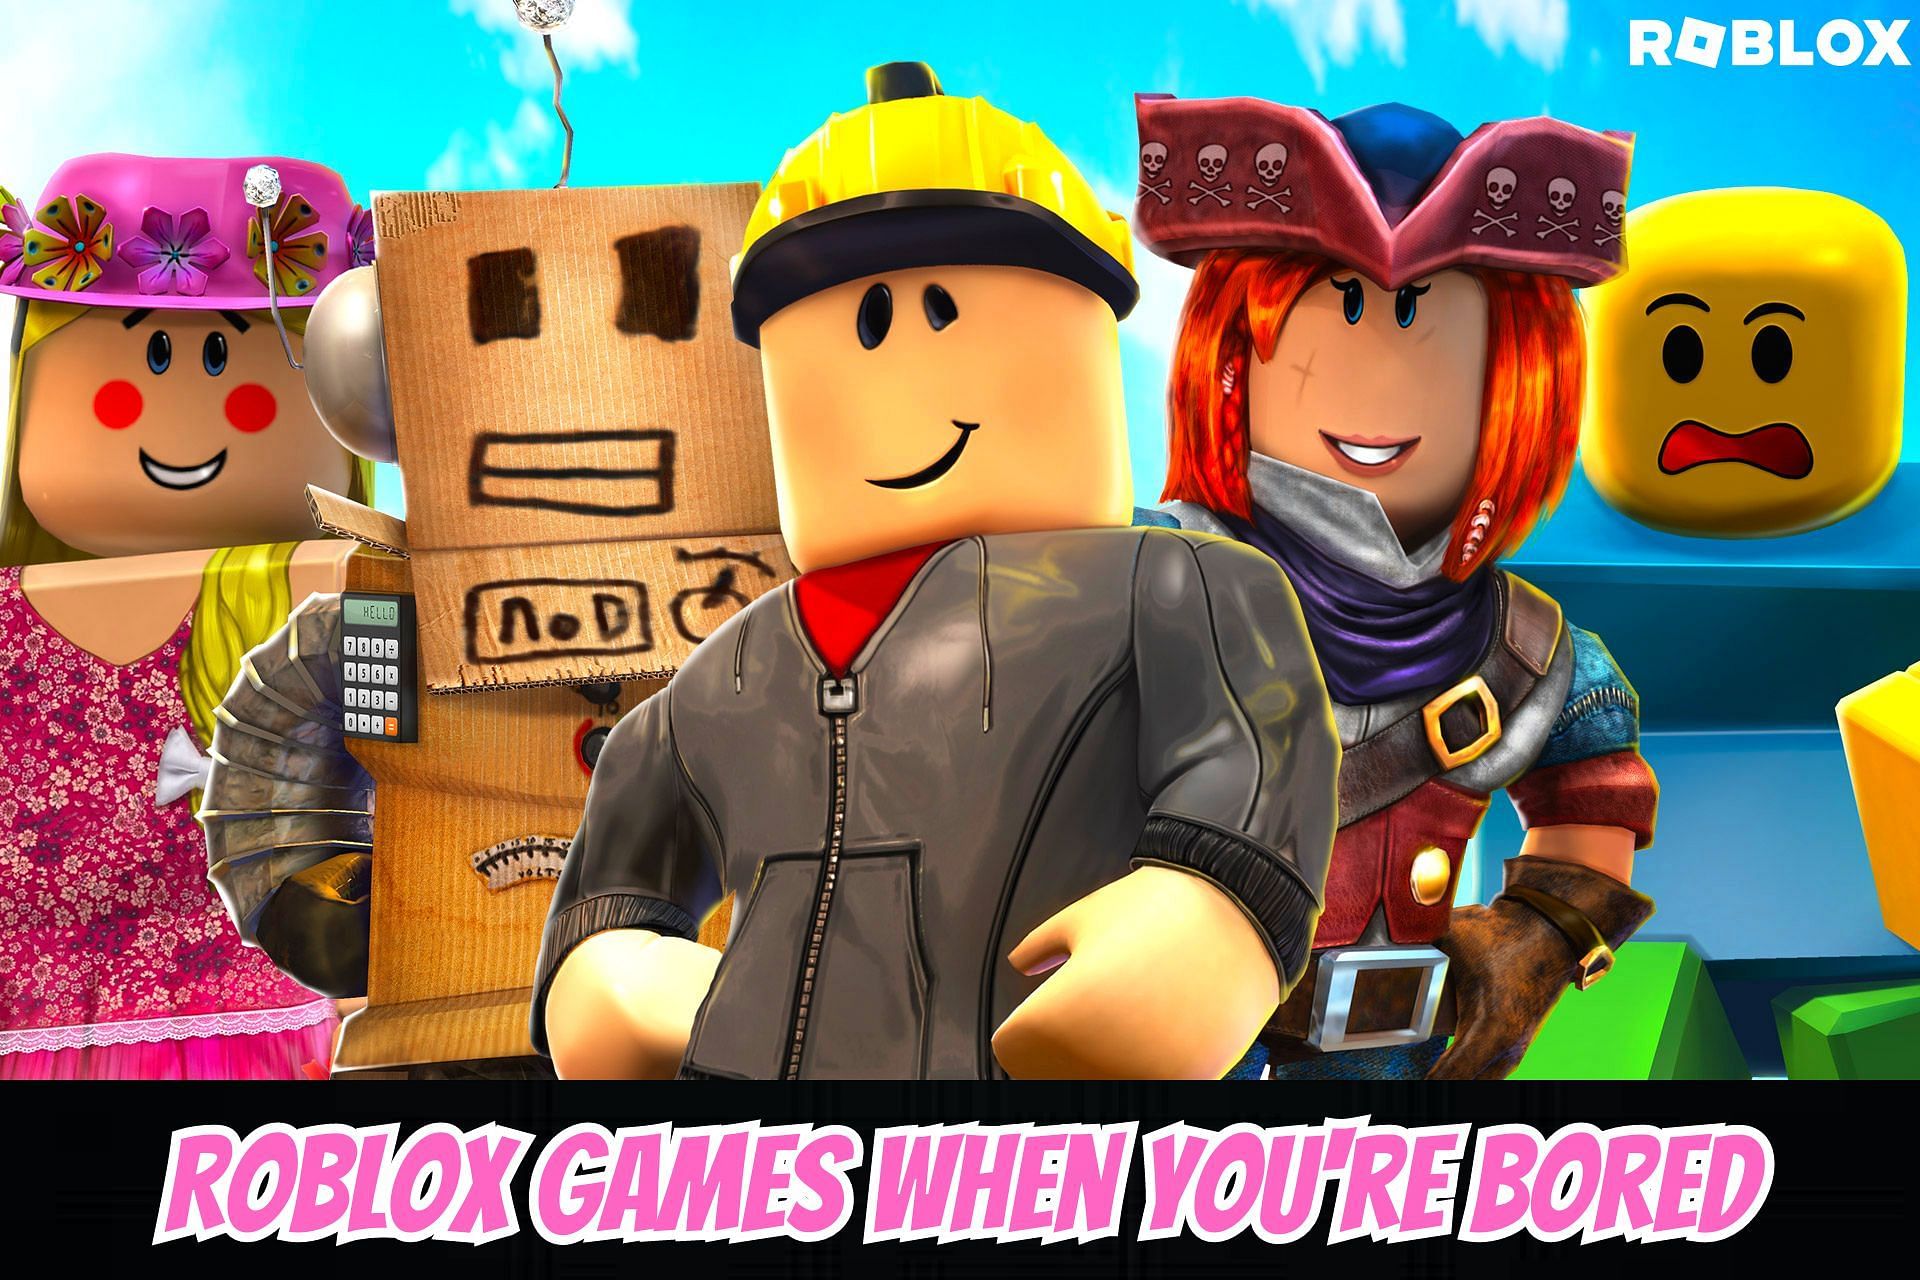 I'm bored and wanna play fun Roblox games. Do you guys have any  recommendations? : r/roblox